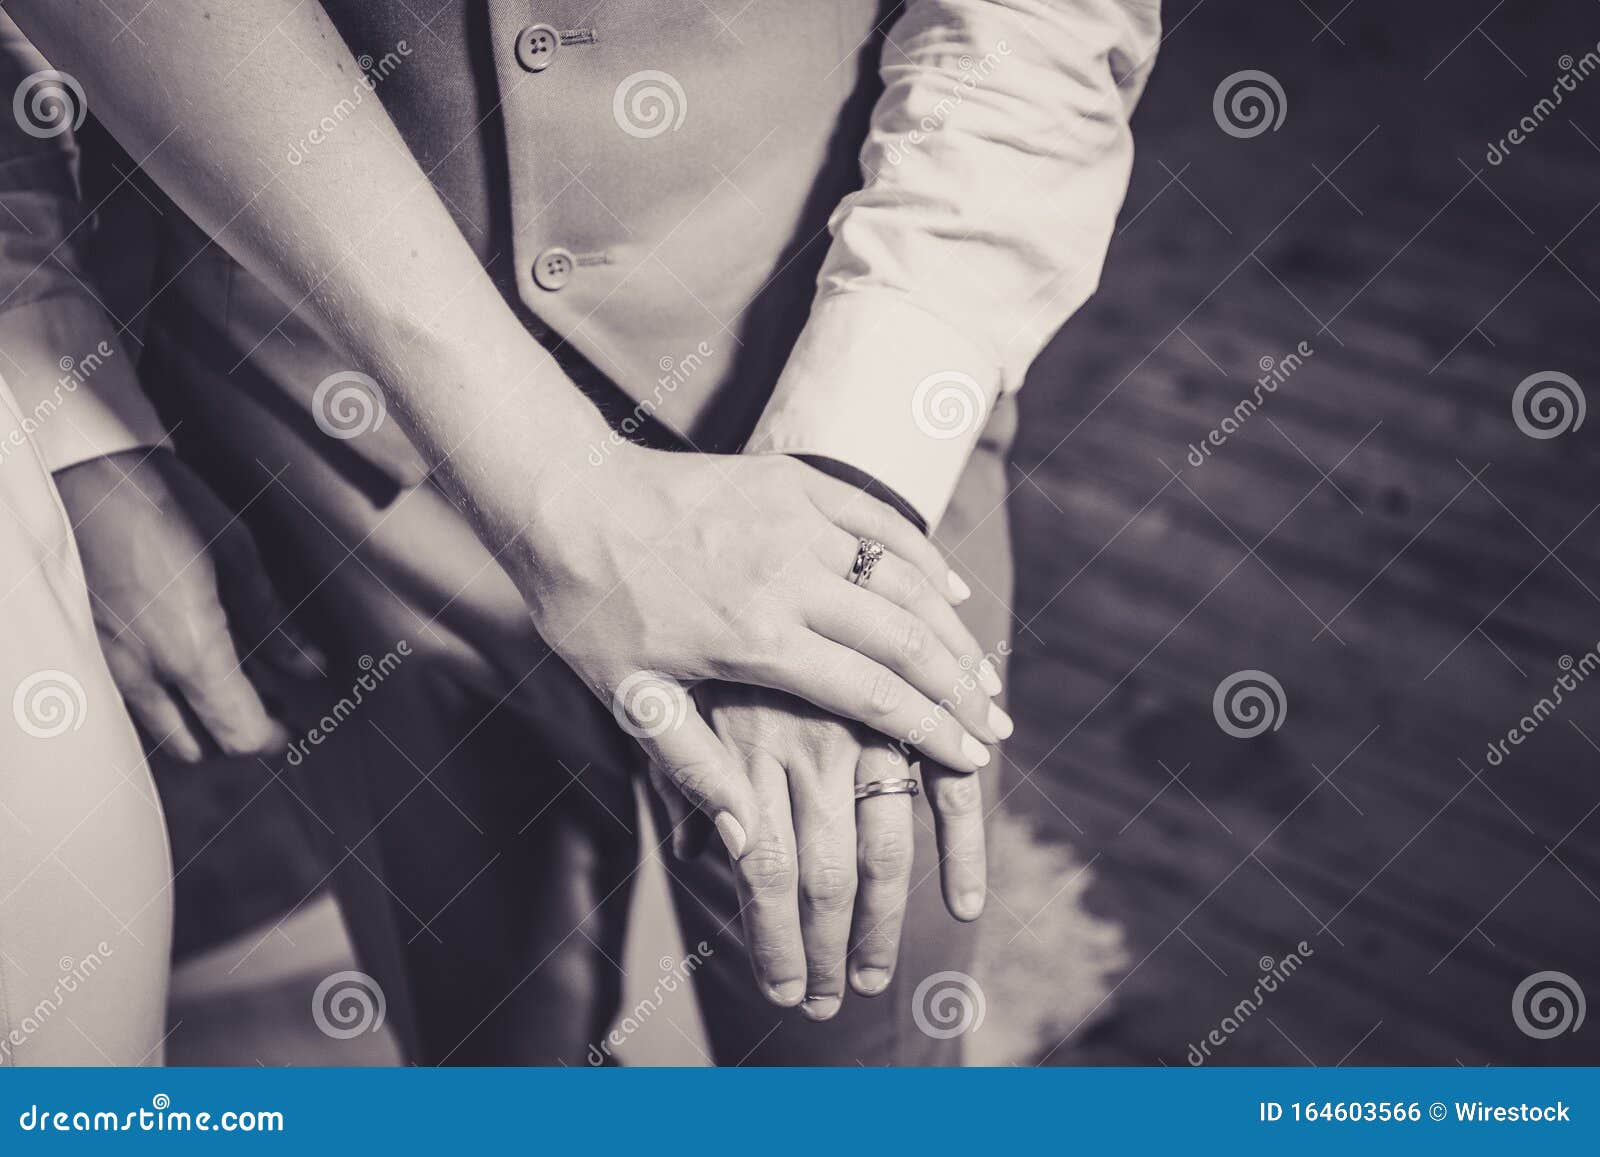 cute couple holding hands